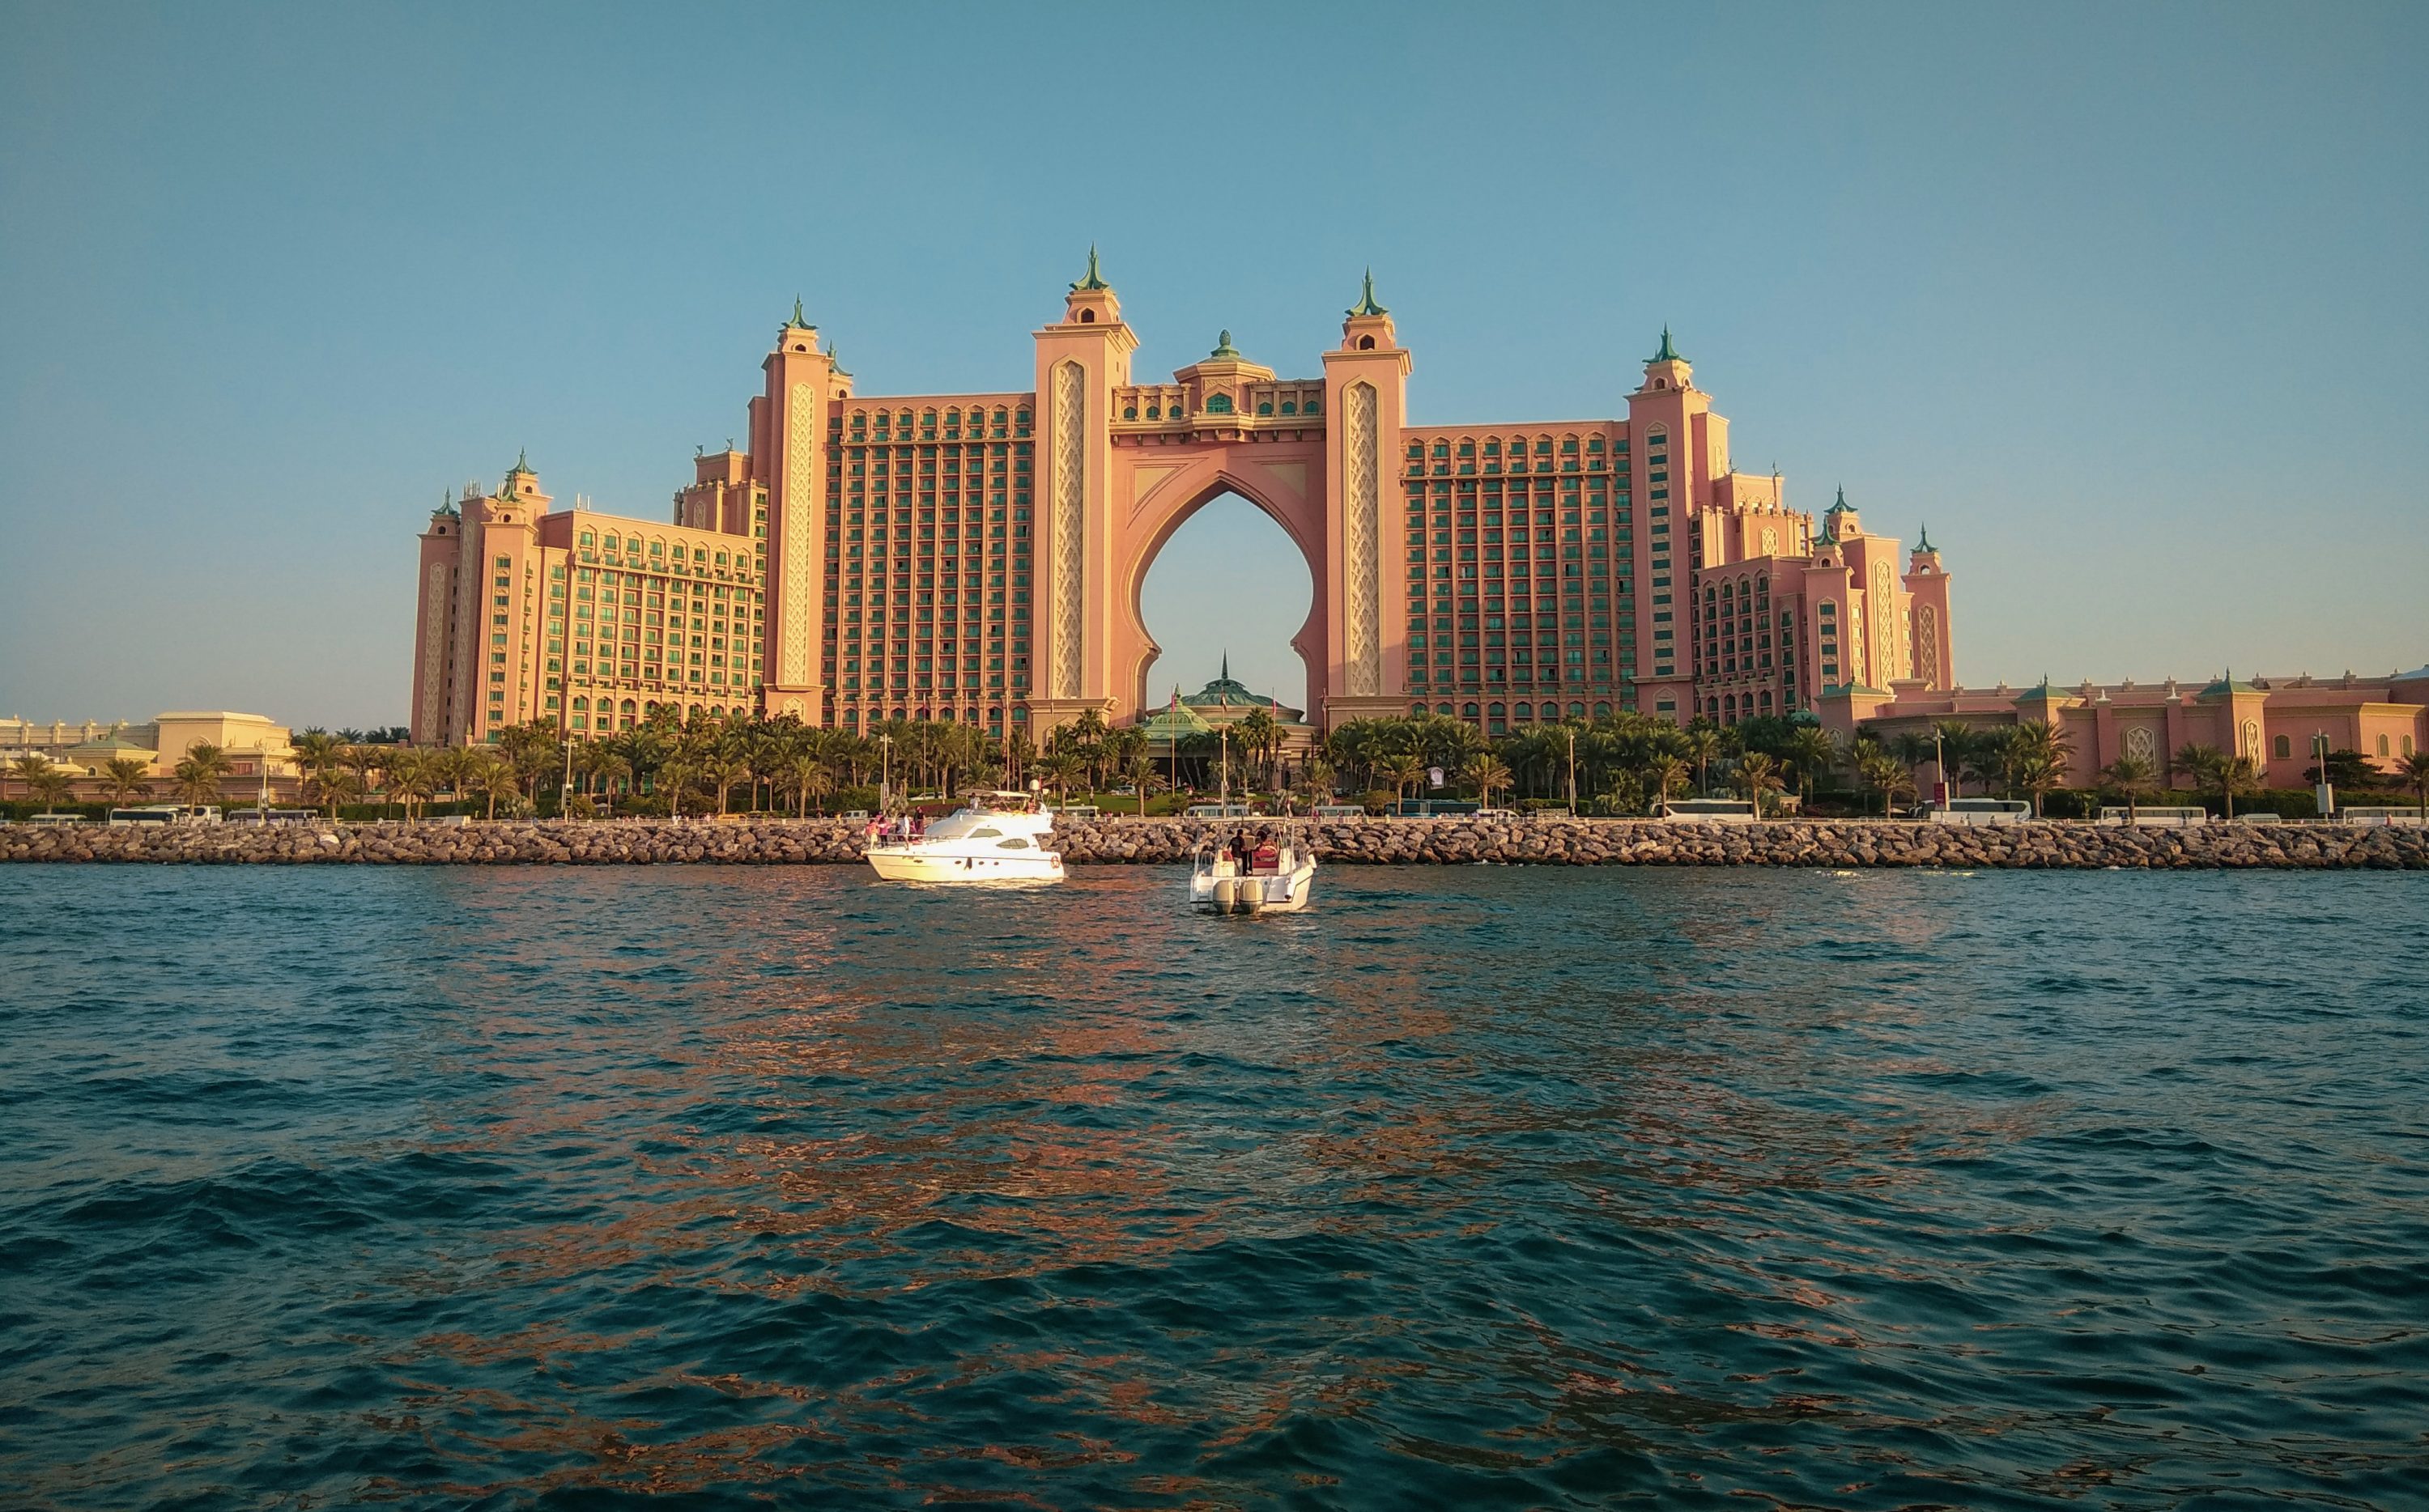 View of Atlantis, The Plam from Yatch